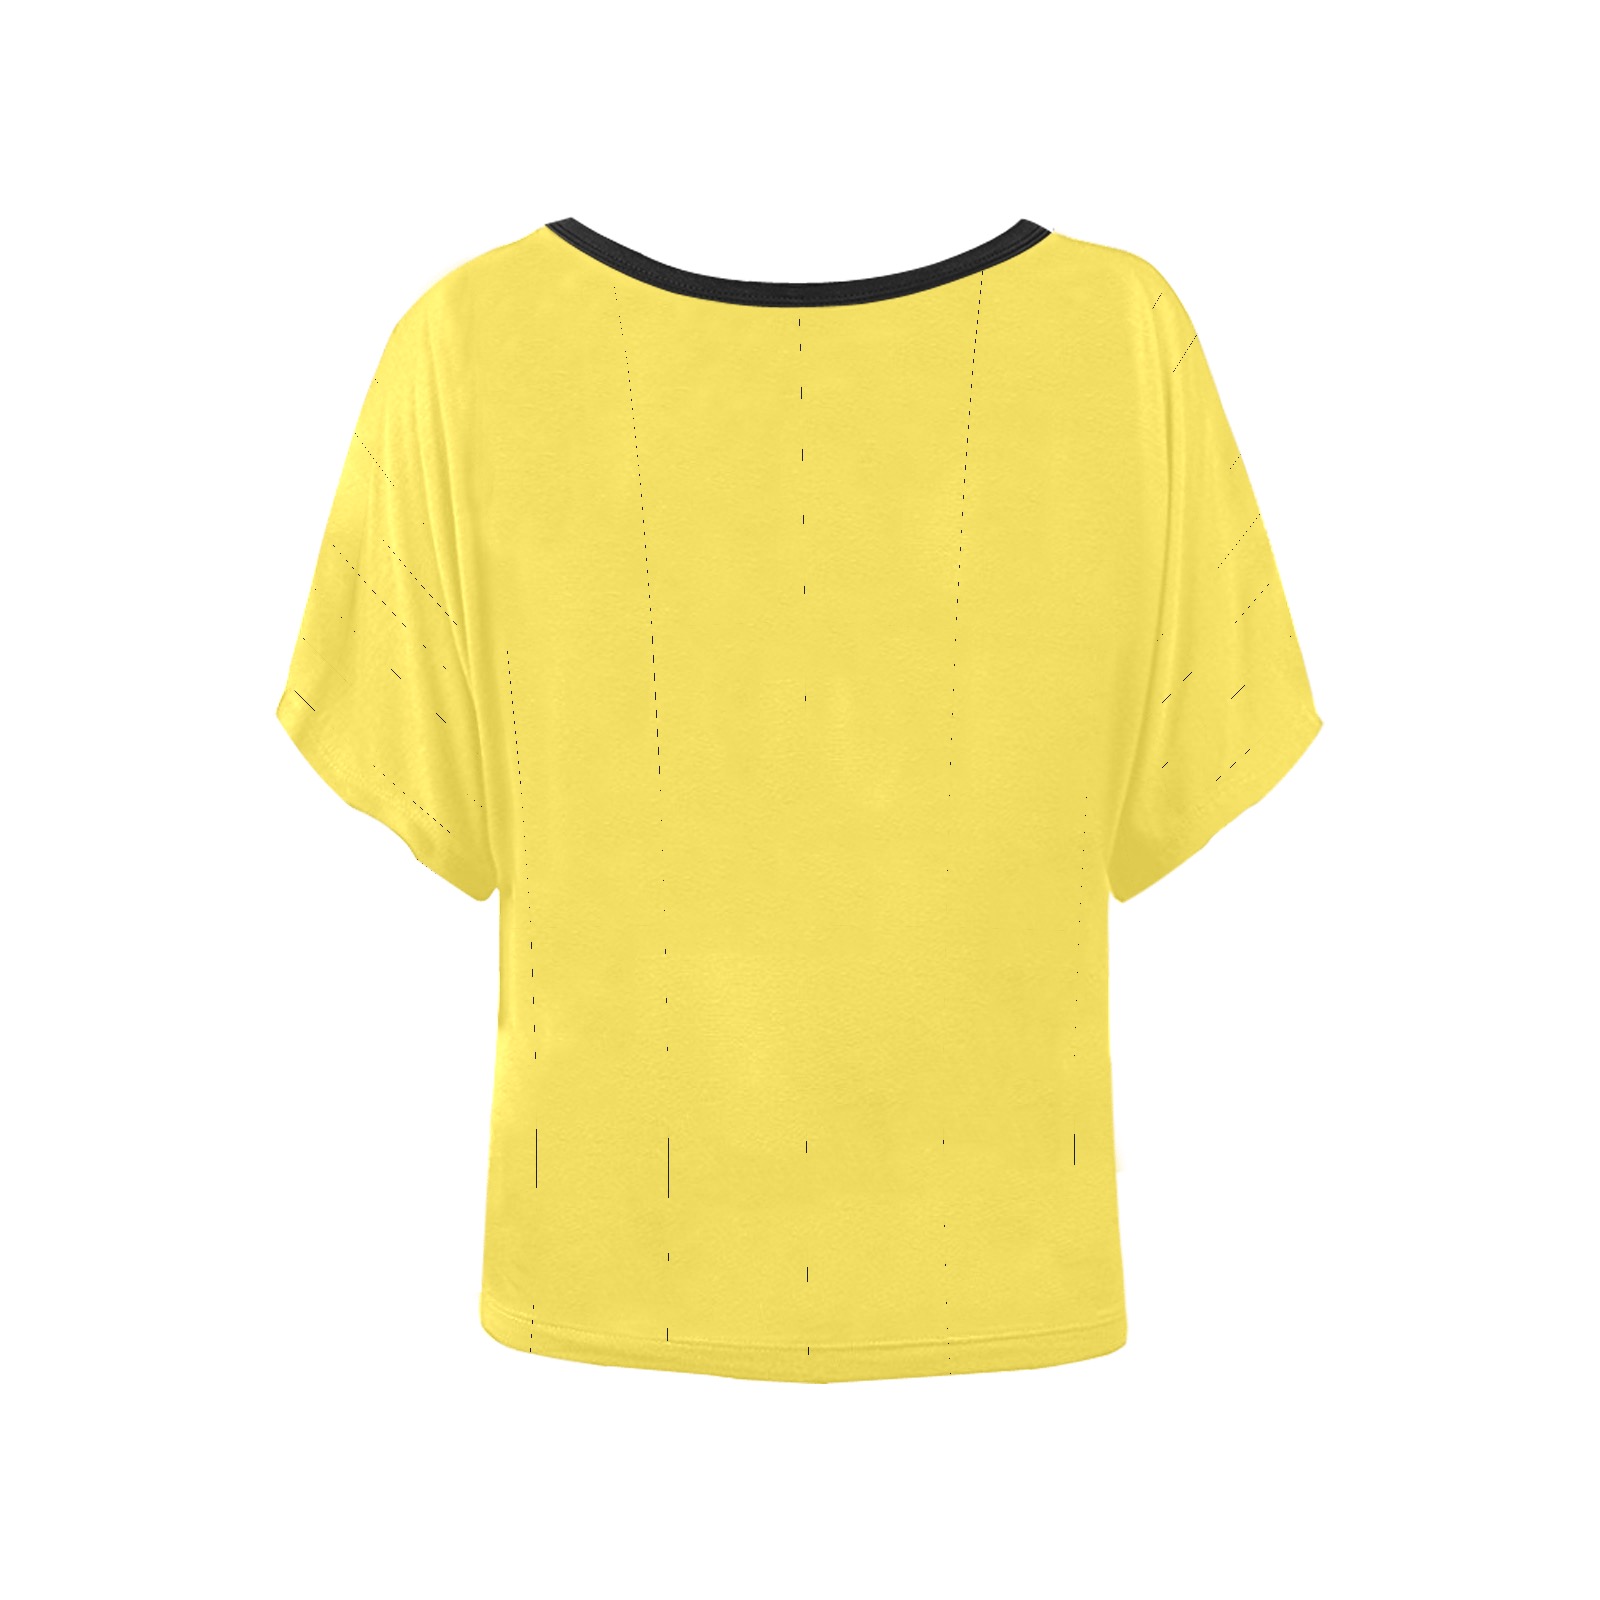 Rm0518 - 18 Sun above me sand beneath me salty air Women's Batwing-Sleeved Blouse T shirt (Model T44)